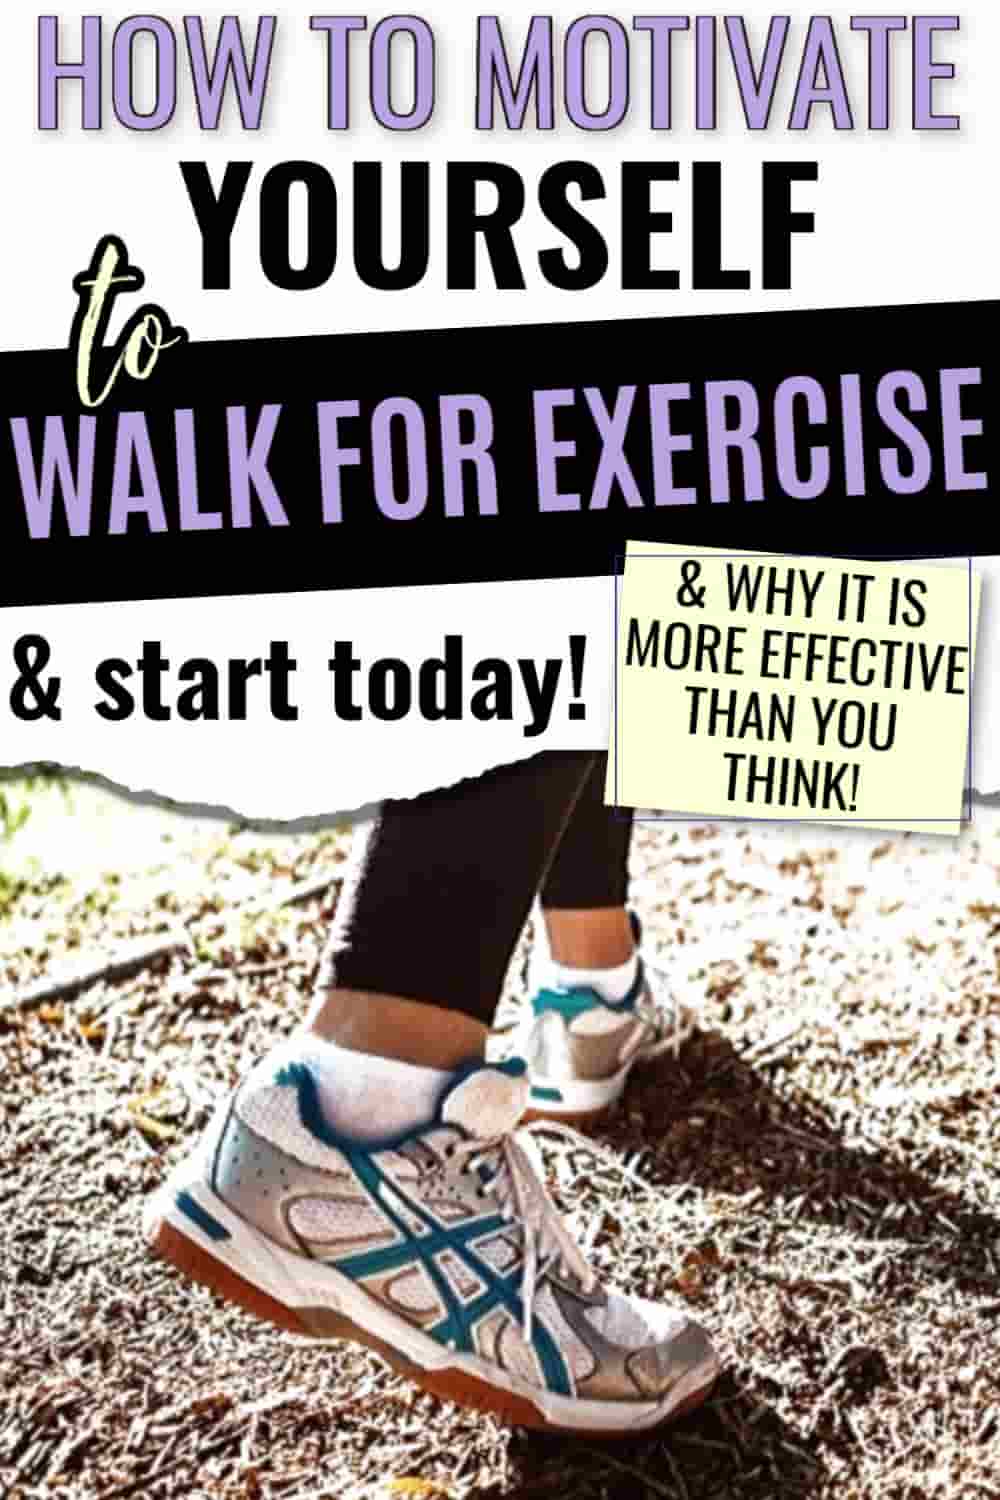 How to Motivate yourself to walk for exercise and start today